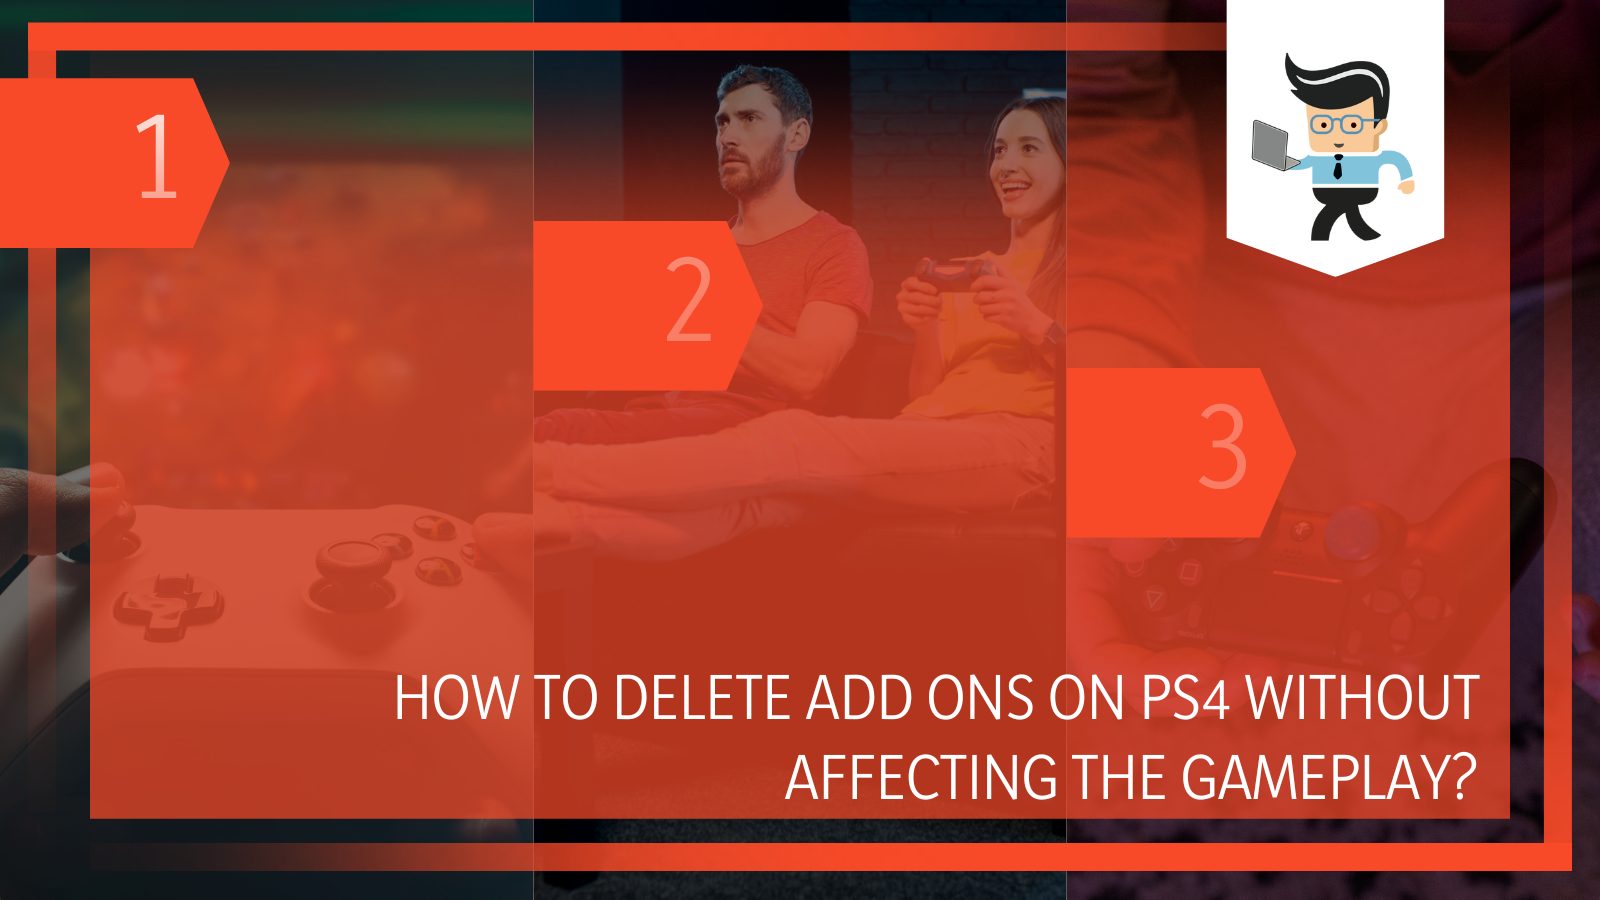 Delete Add Ons on PS4 Without Affecting The Gameplay